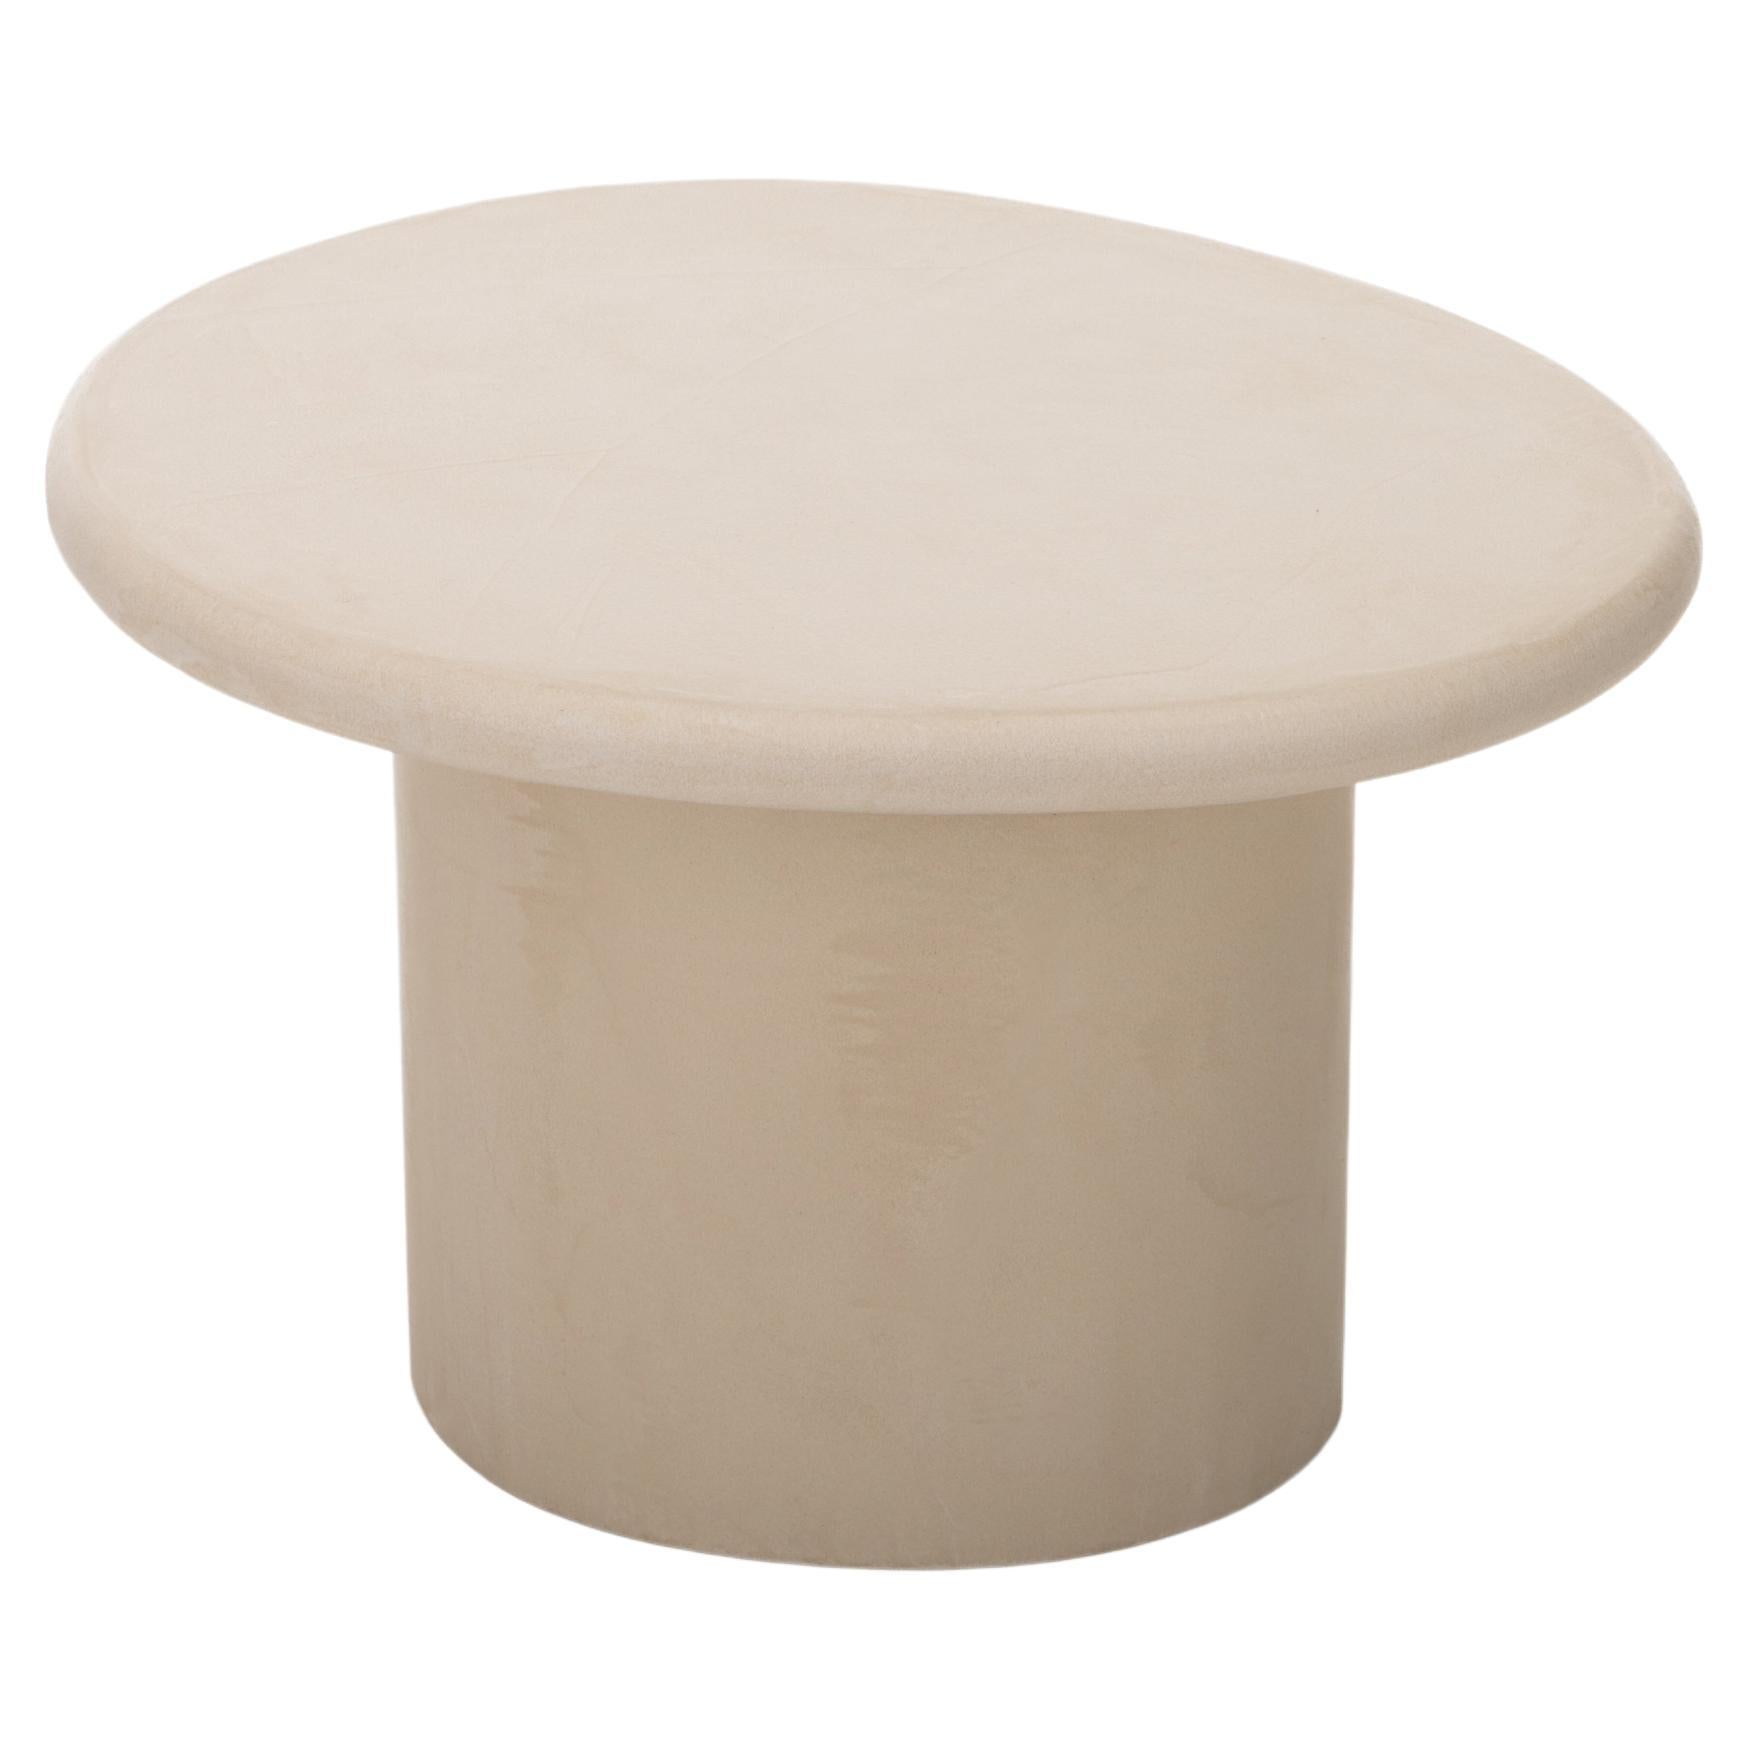 Organic Shaped Natural Plaster Coffee Table "Sami" by Isabelle Beaumont